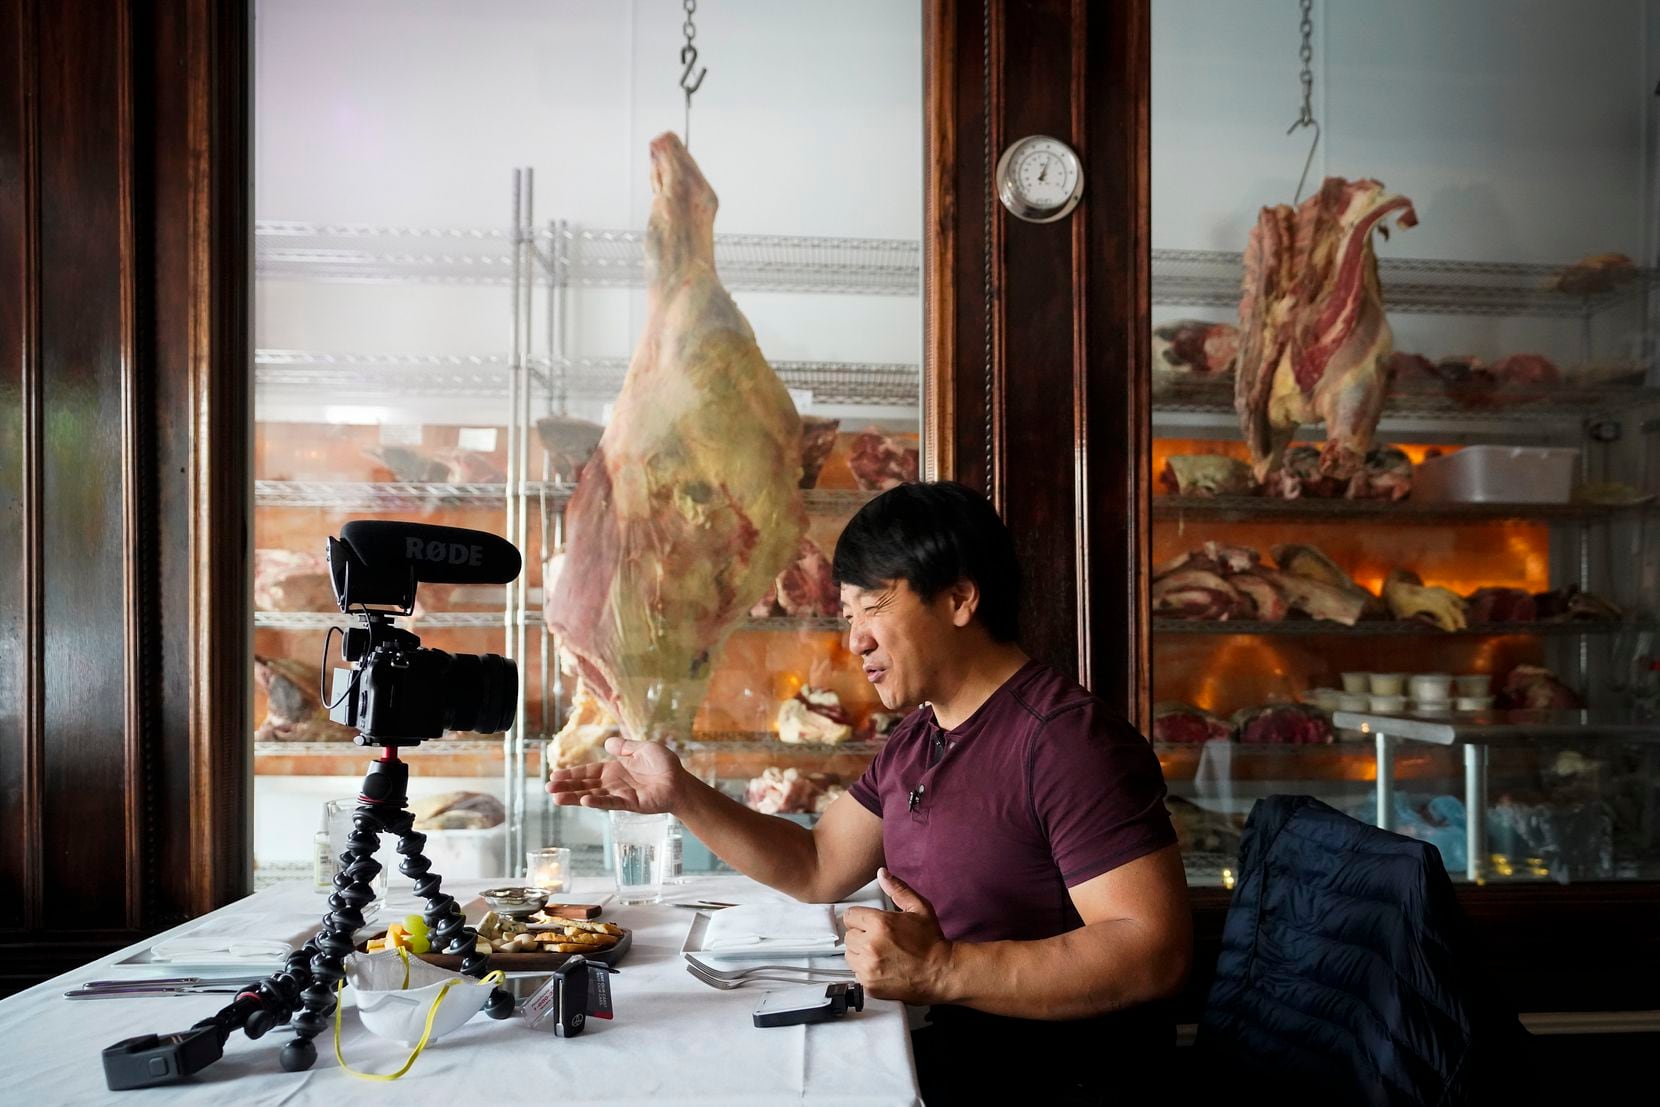 Foodies might stumble upon YouTuber Mike Chen filming videos at restaurants in Dallas and its suburbs. Here, he visits BAR-Ranch Steak Company in Plano.